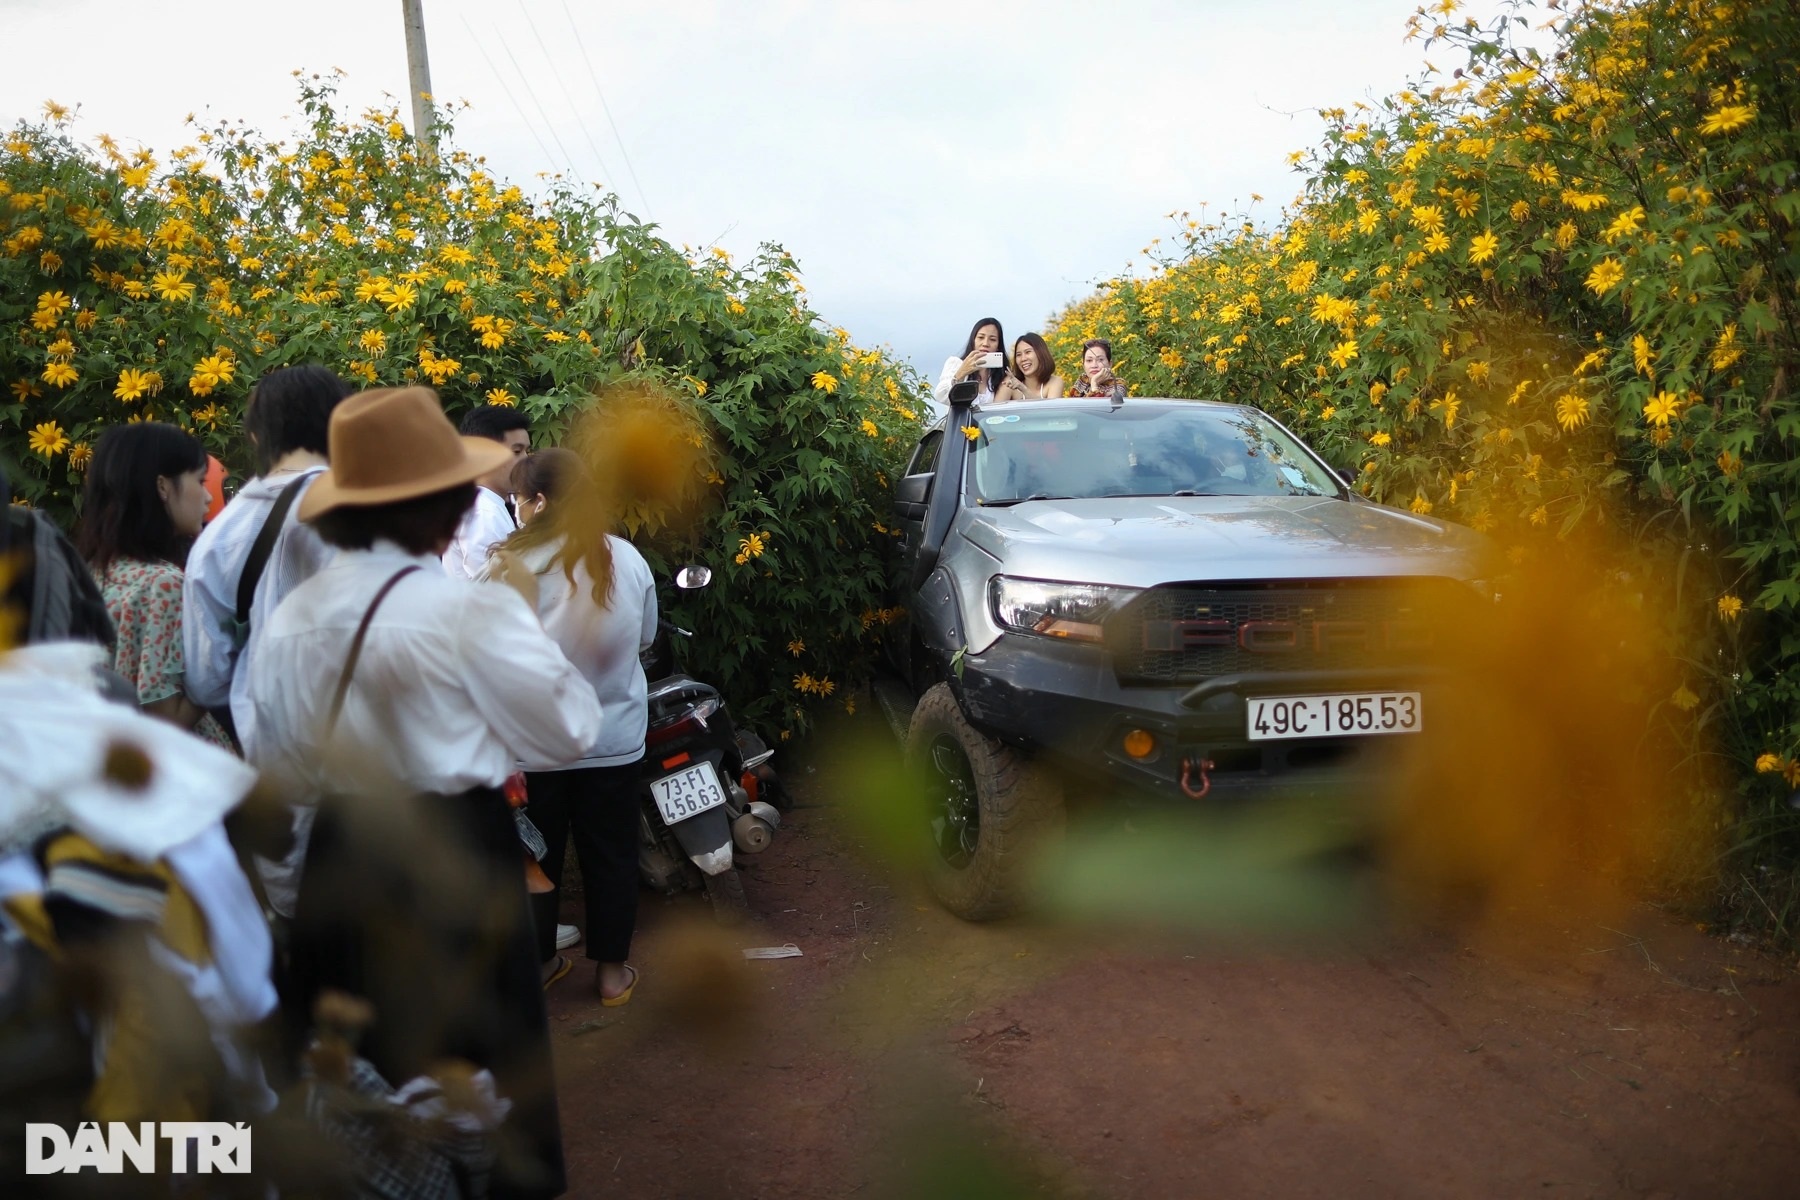 Wild sunflowers bloom on the hillside, young people flock to the outskirts of Da Lat to check-in - 14